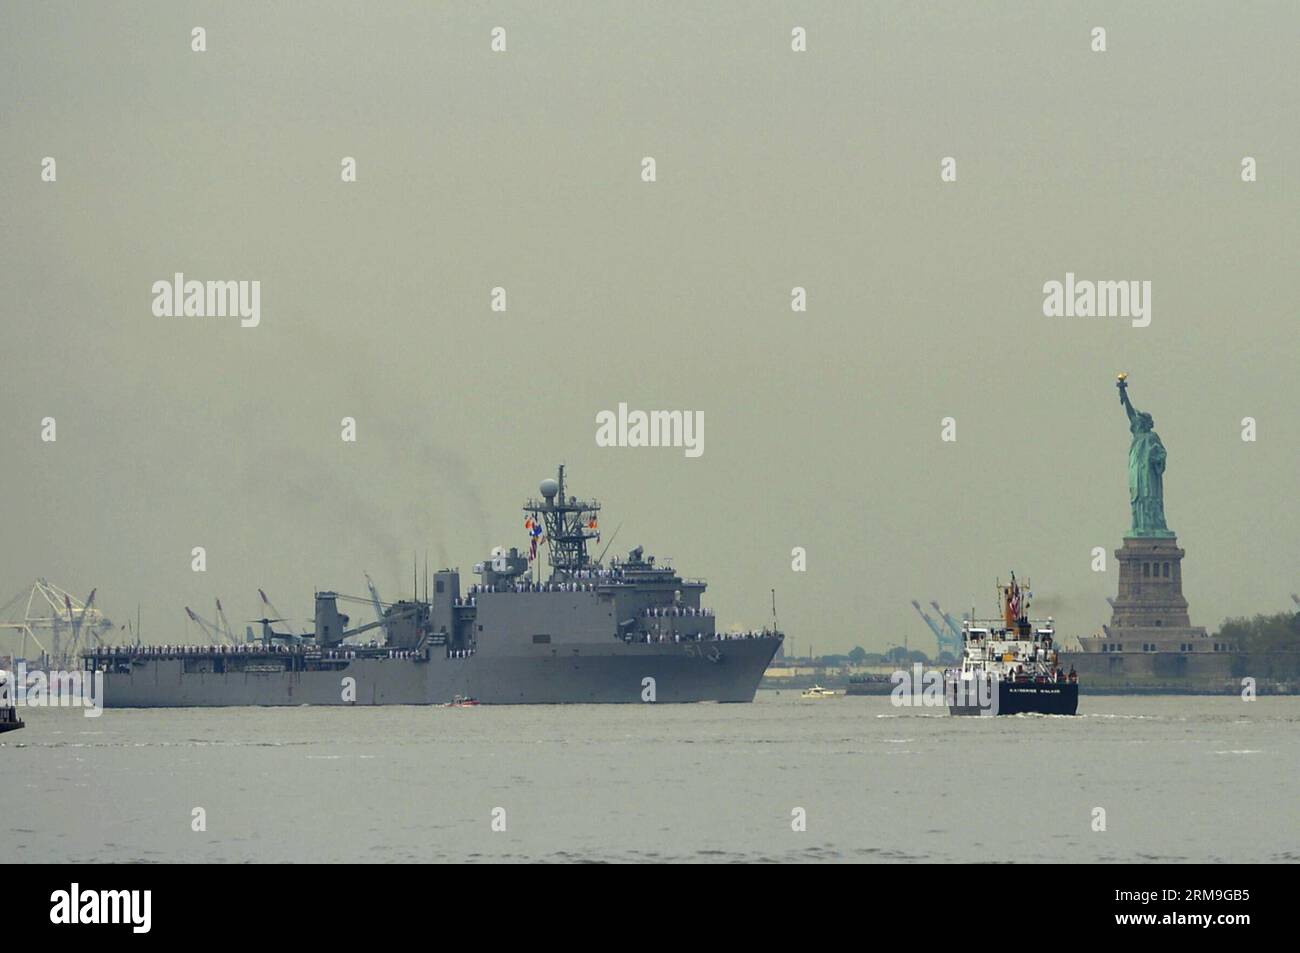 NEW YORK, (Xinhua) -- The USS Oak Hill passes the Statue of Liberty during the parade of fleet week, in New York, the United States, on May 21, 2014. (Xinhua/Wang Lei) US-NEW YORK-FLEET WEEK-SHIPS PARADE PUBLICATIONxNOTxINxCHN   New York XINHUA The USS Oak Hill Pass The Statue of Liberty during The Parade of Fleet Week in New York The United States ON May 21 2014 XINHUA Wang Lei U.S. New York Fleet Week Ships Parade PUBLICATIONxNOTxINxCHN Stock Photo